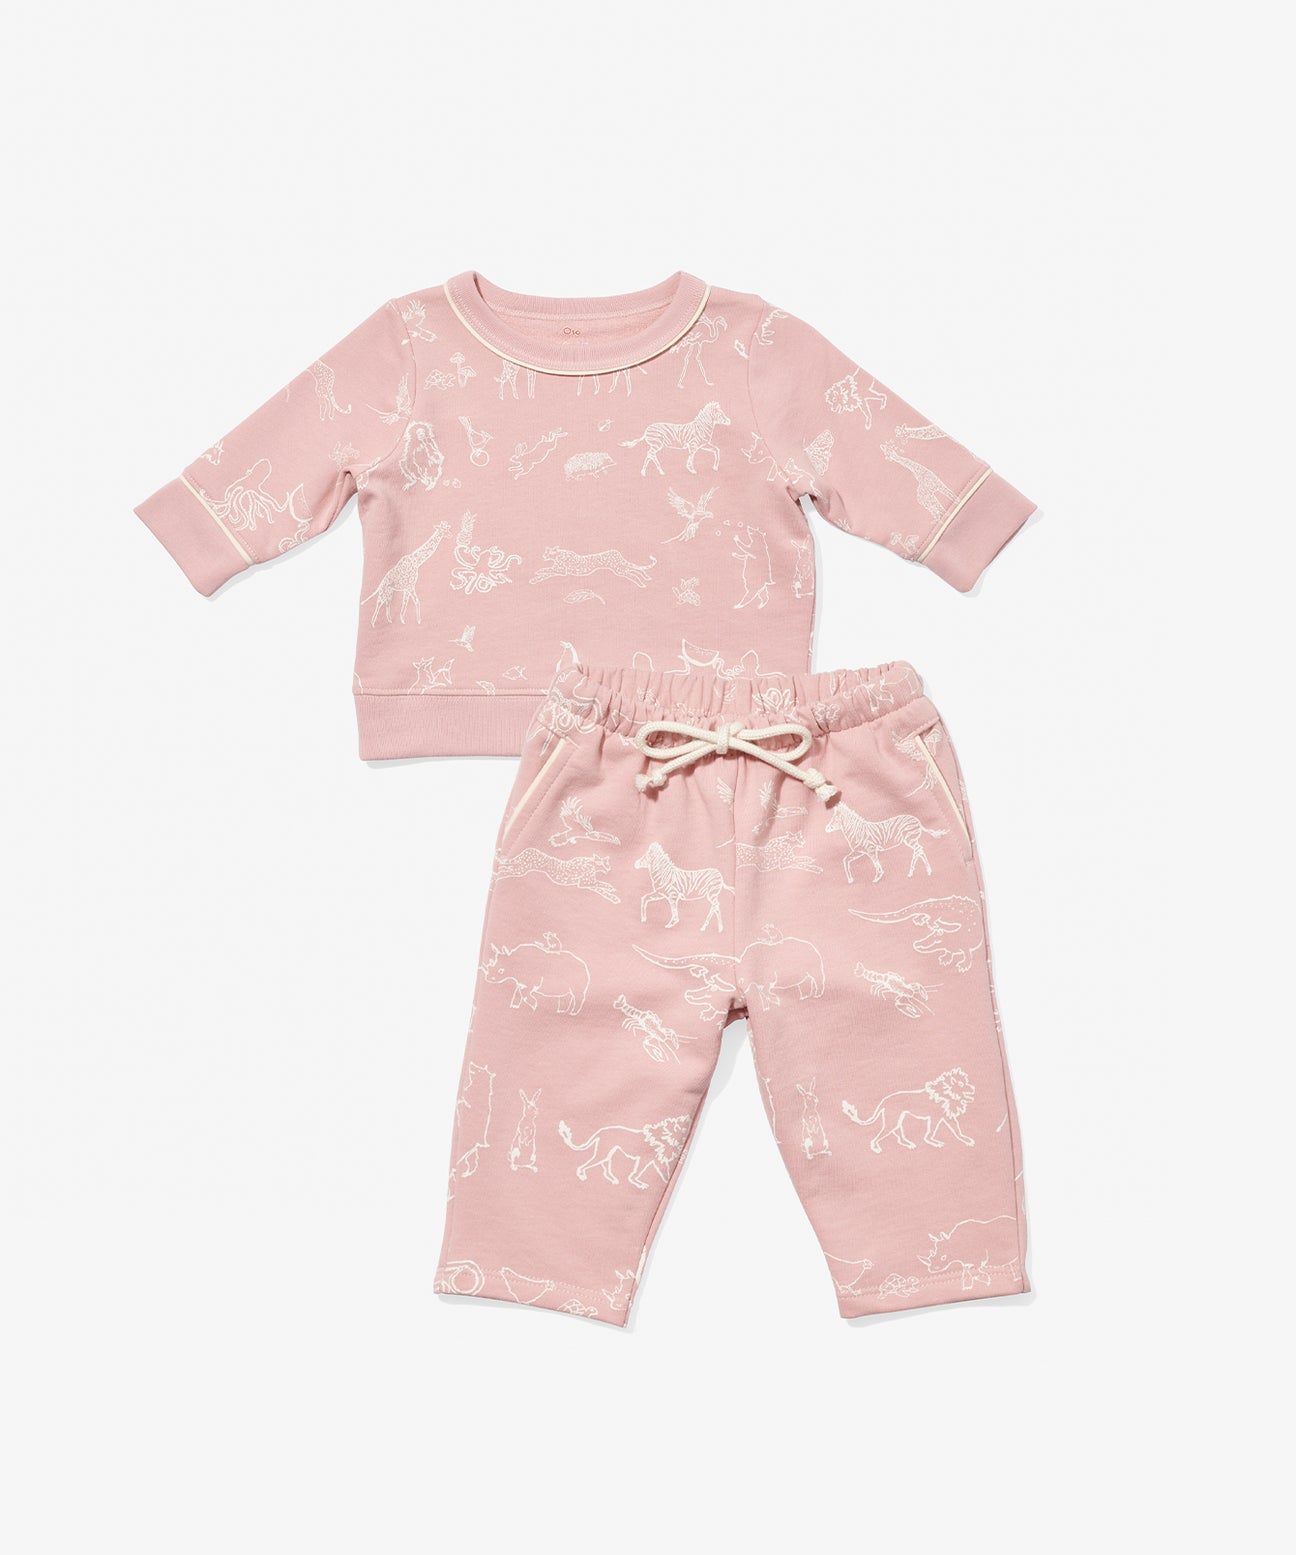 Baby New Arrivals – Oso & Me